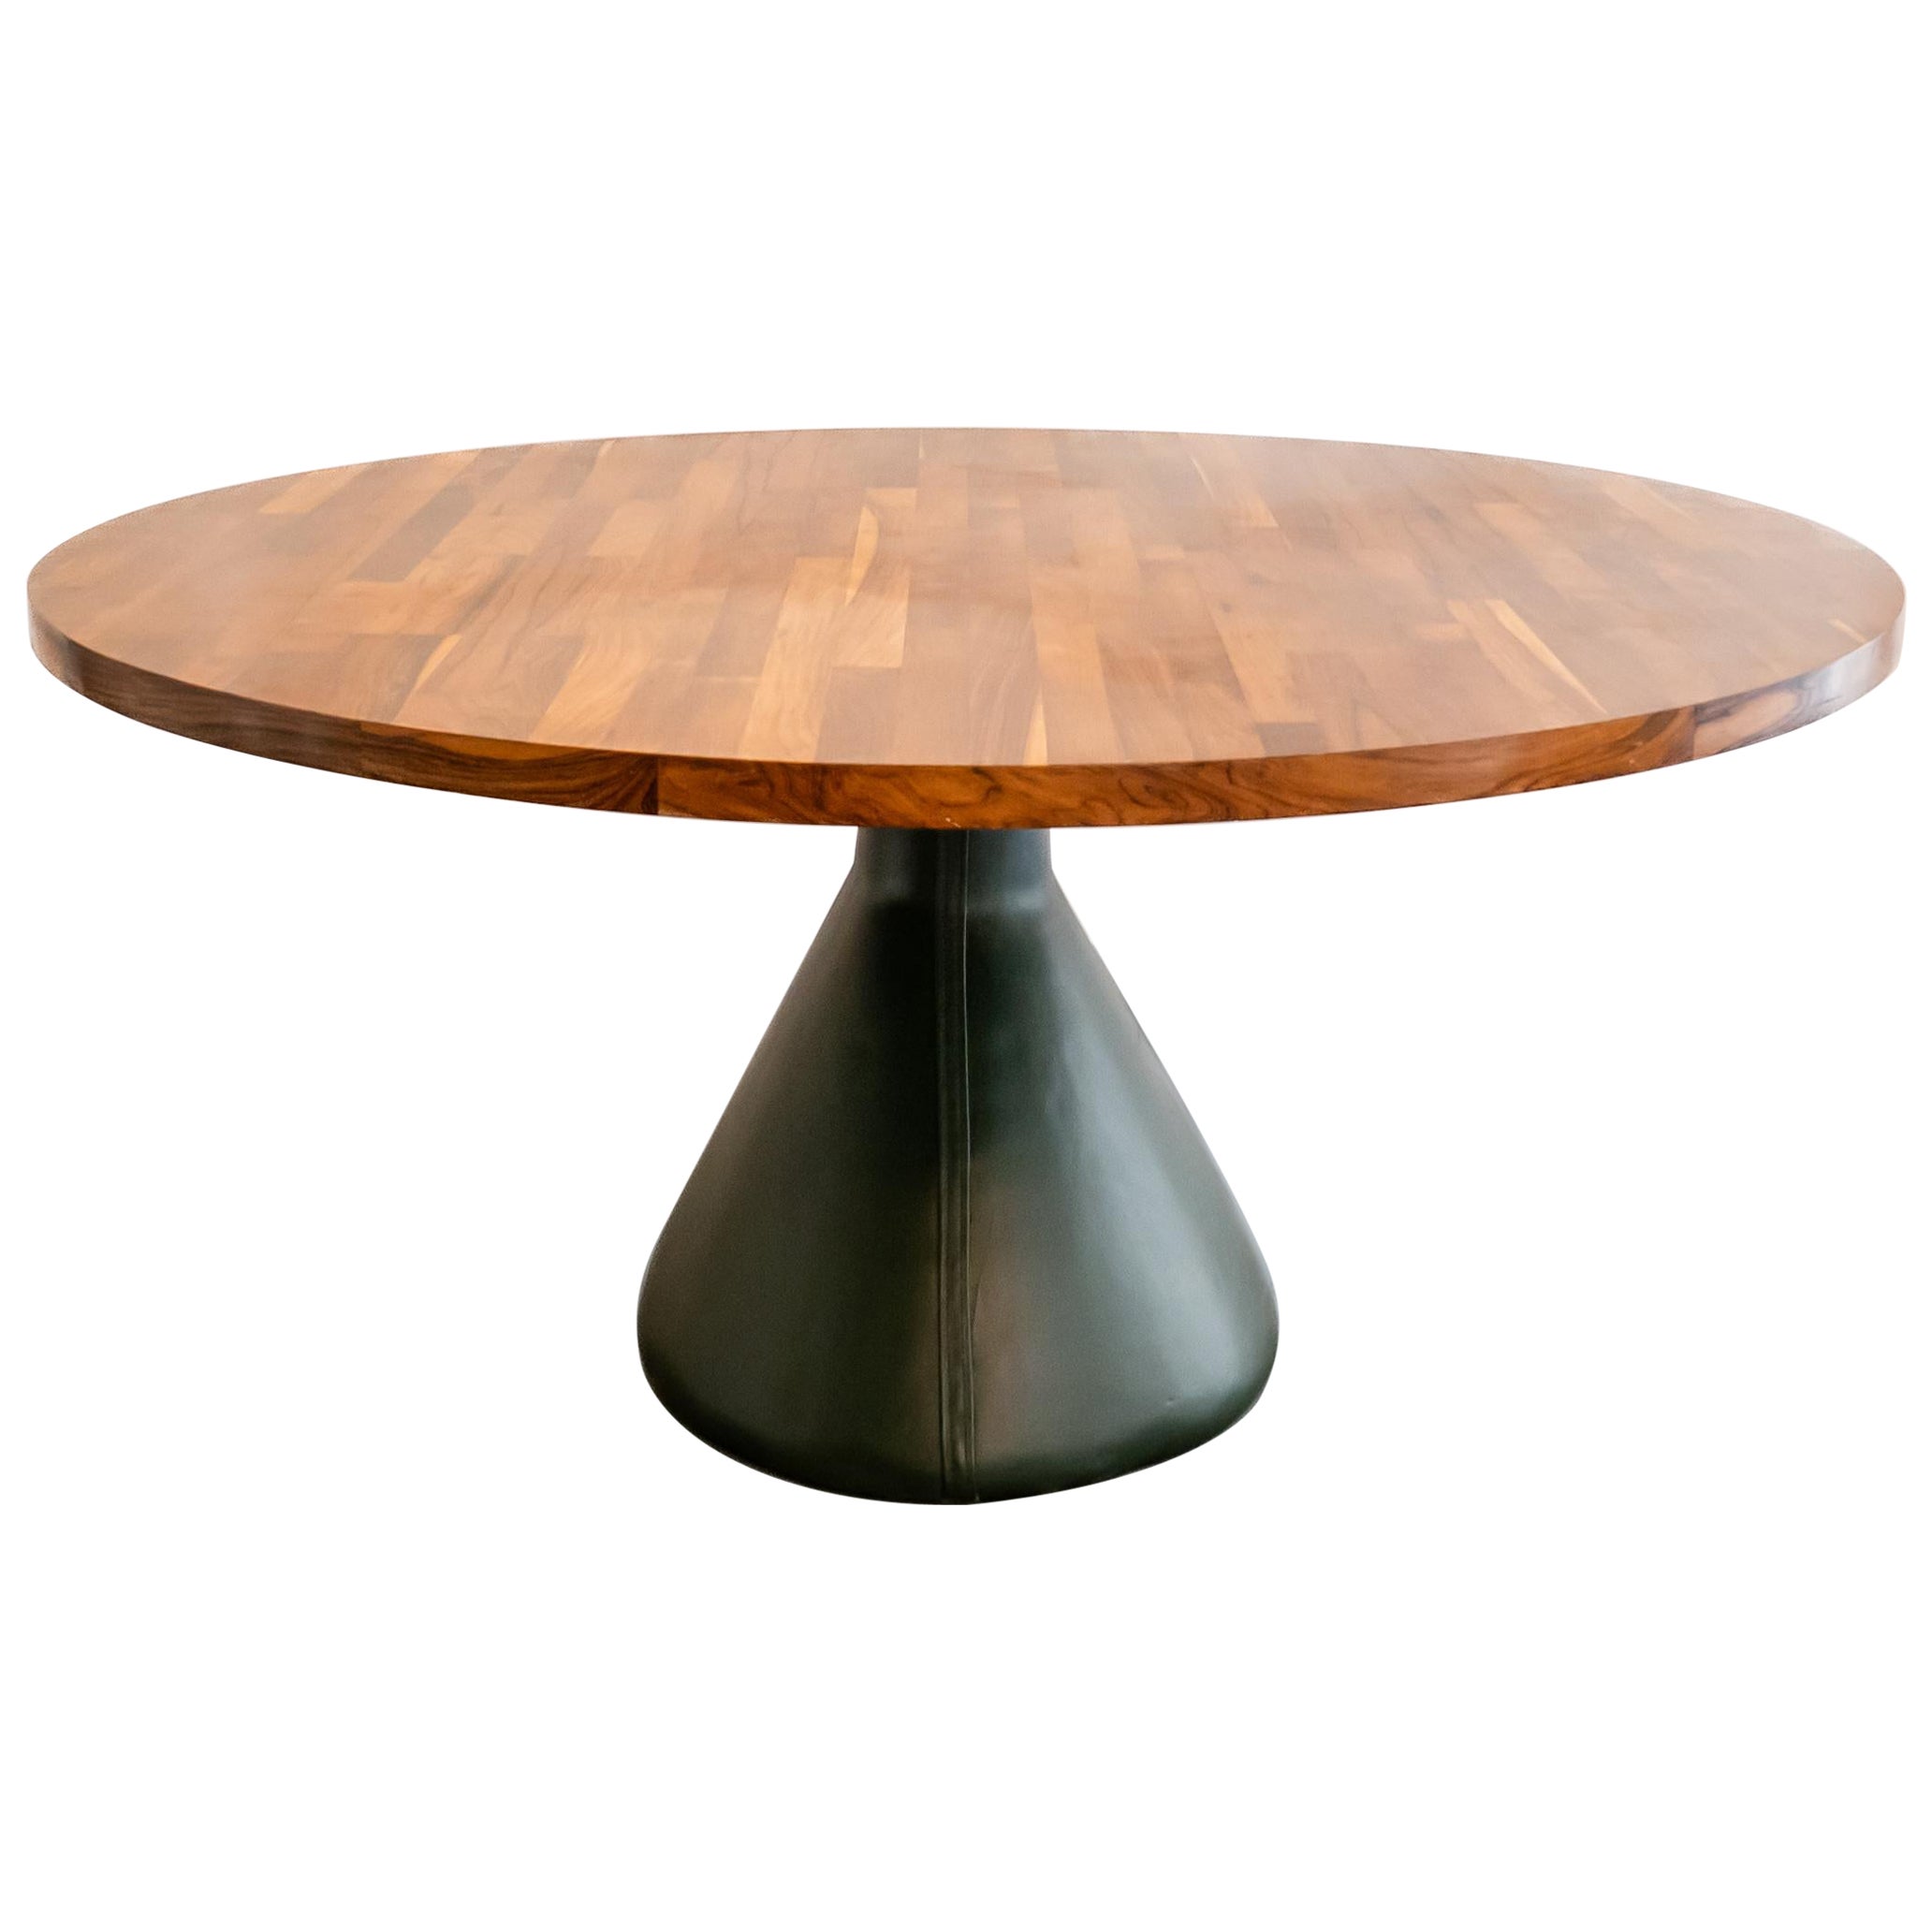 Mid-Century Modern Round Wooden Leather Dining Table by Jorge Zalszupin, 1960s